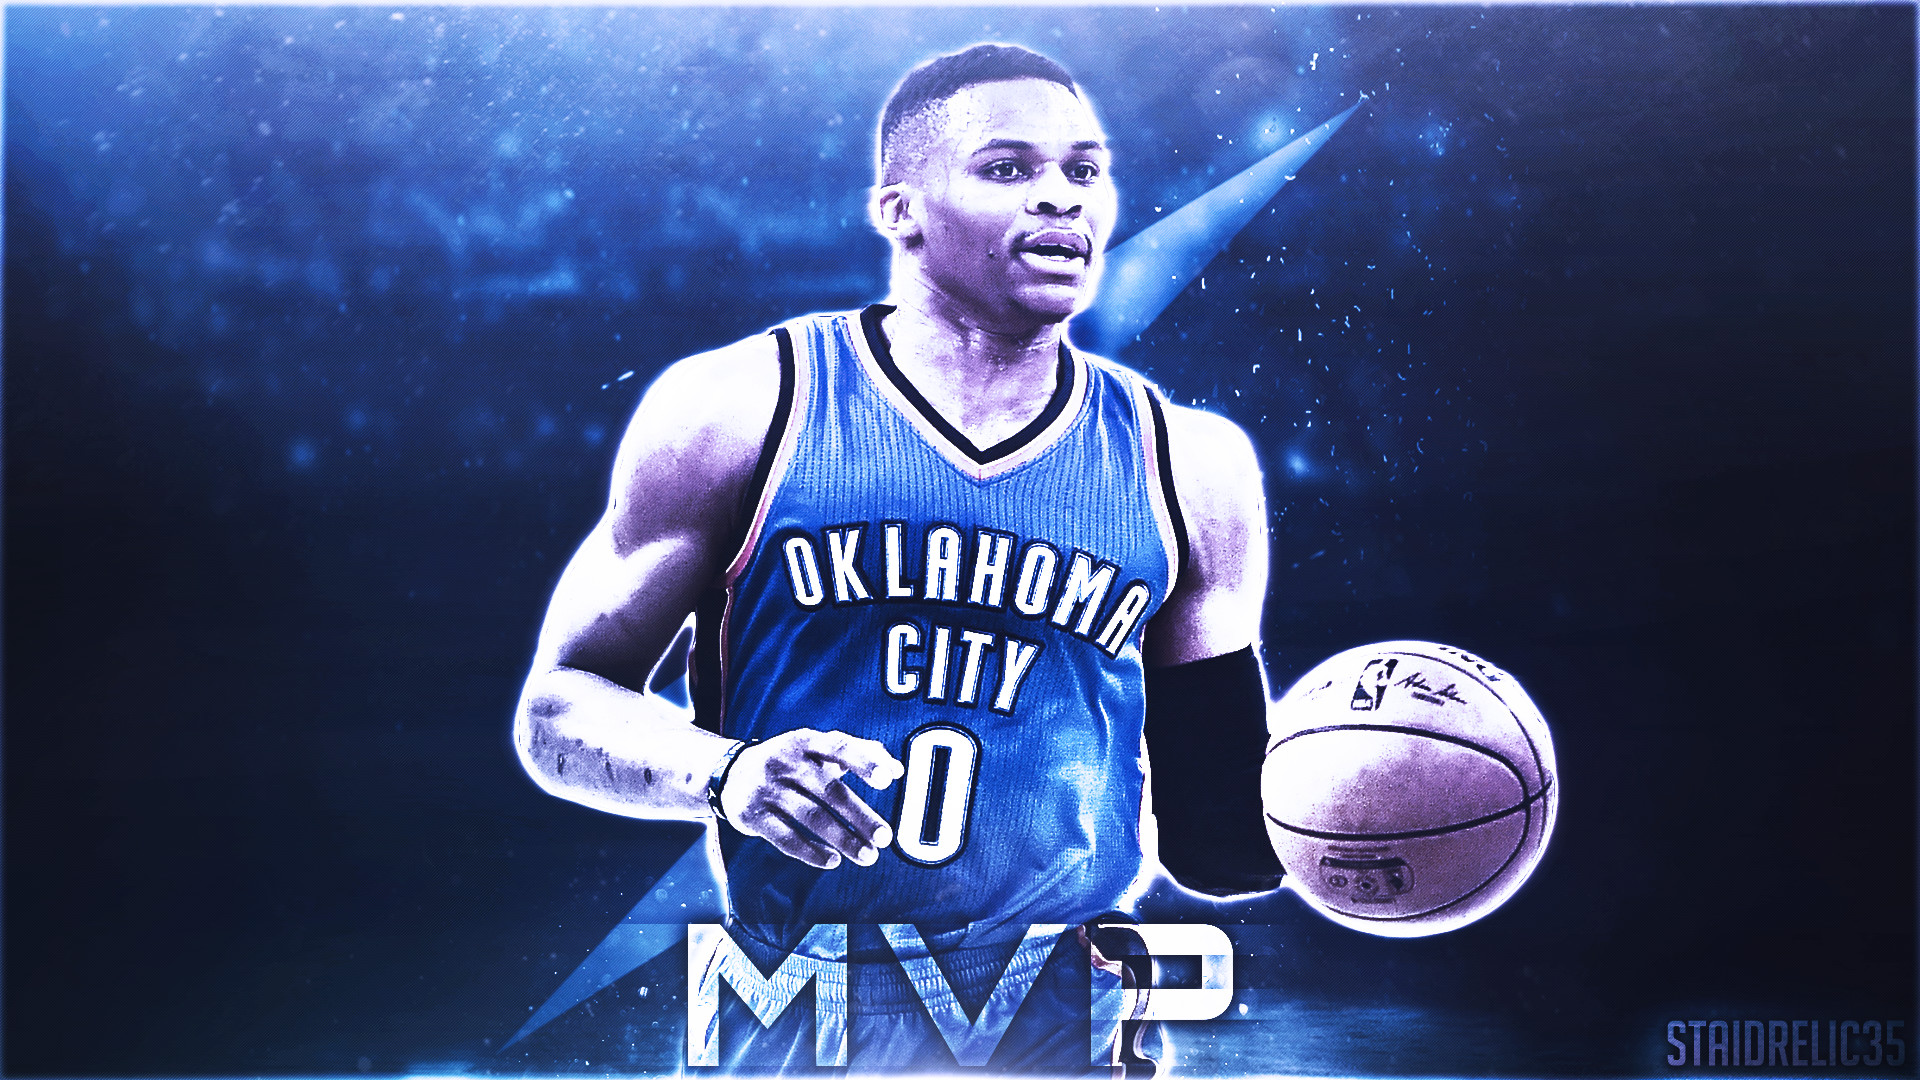 Simple Russell Westbrook MVP design I created. What do you guys think